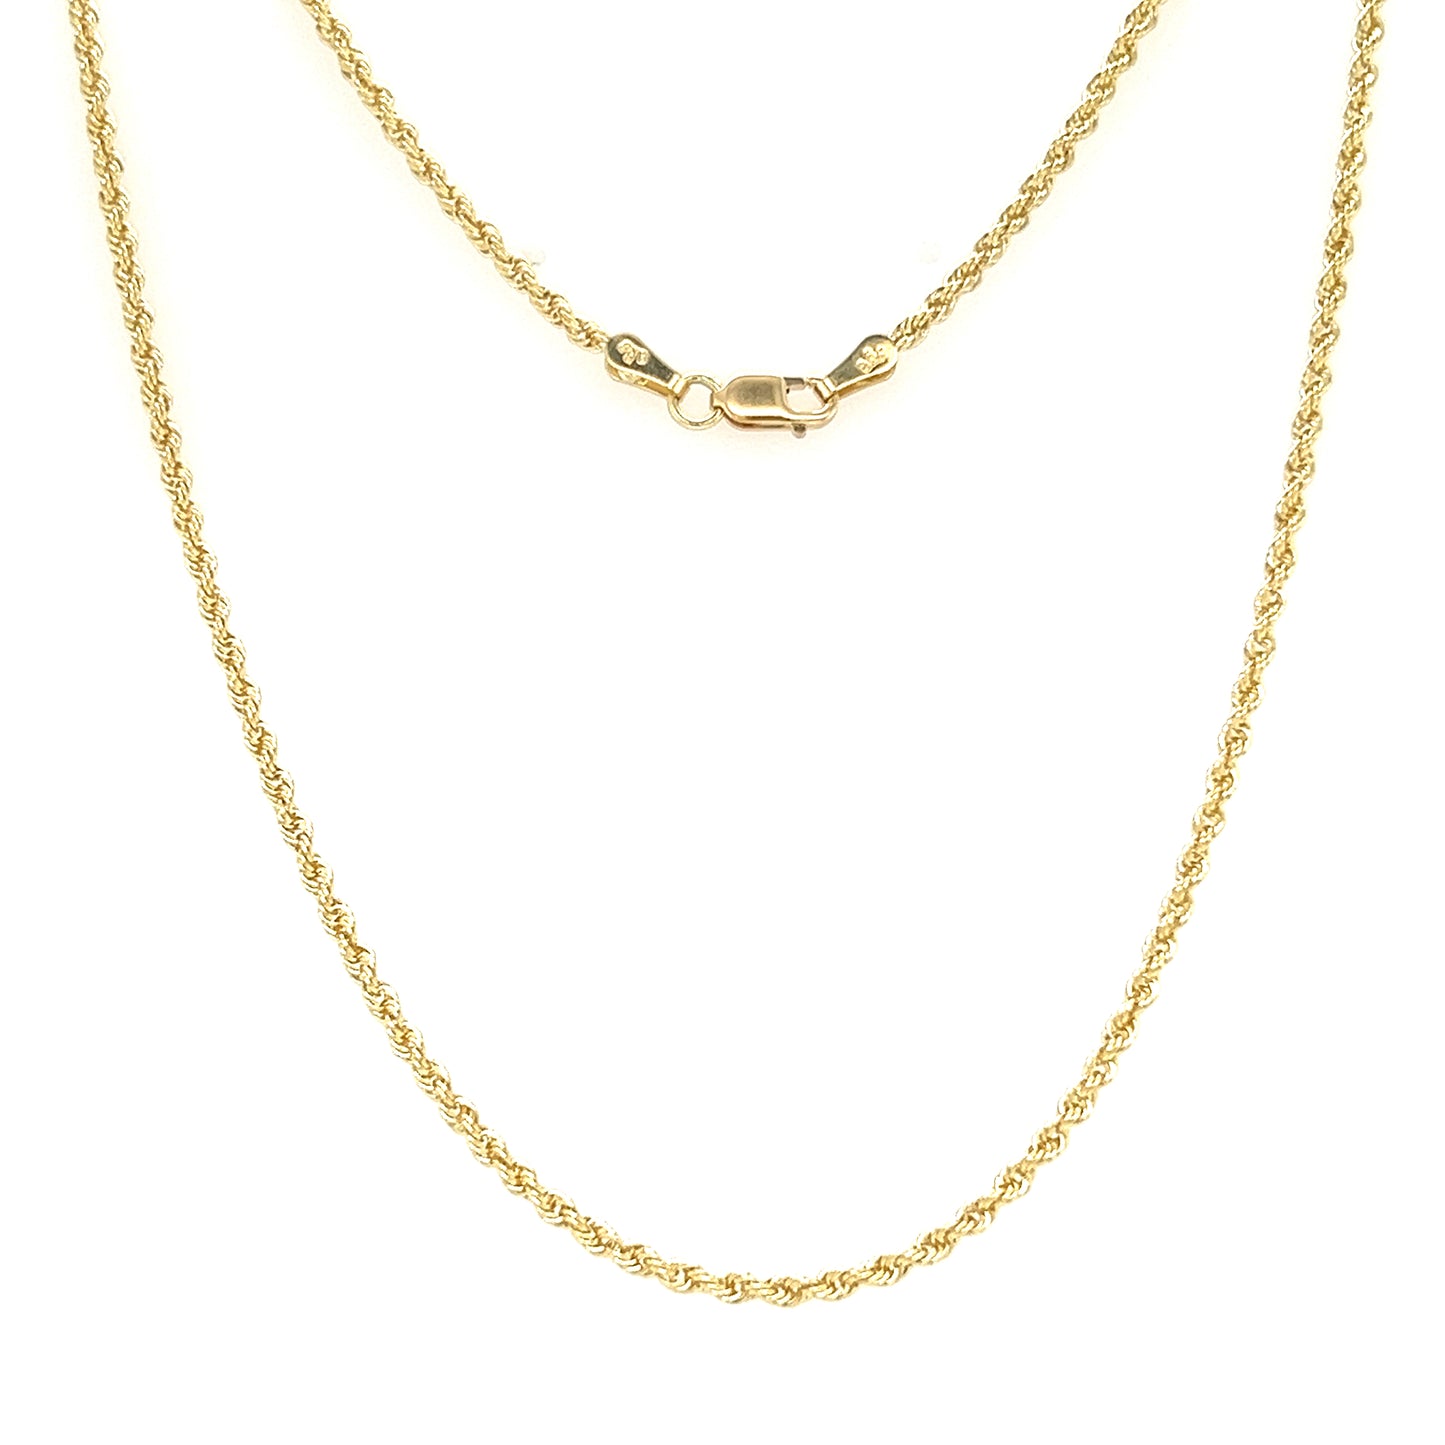 Rope Chain 2mm in 14K Yellow Gold Full Chain Front View